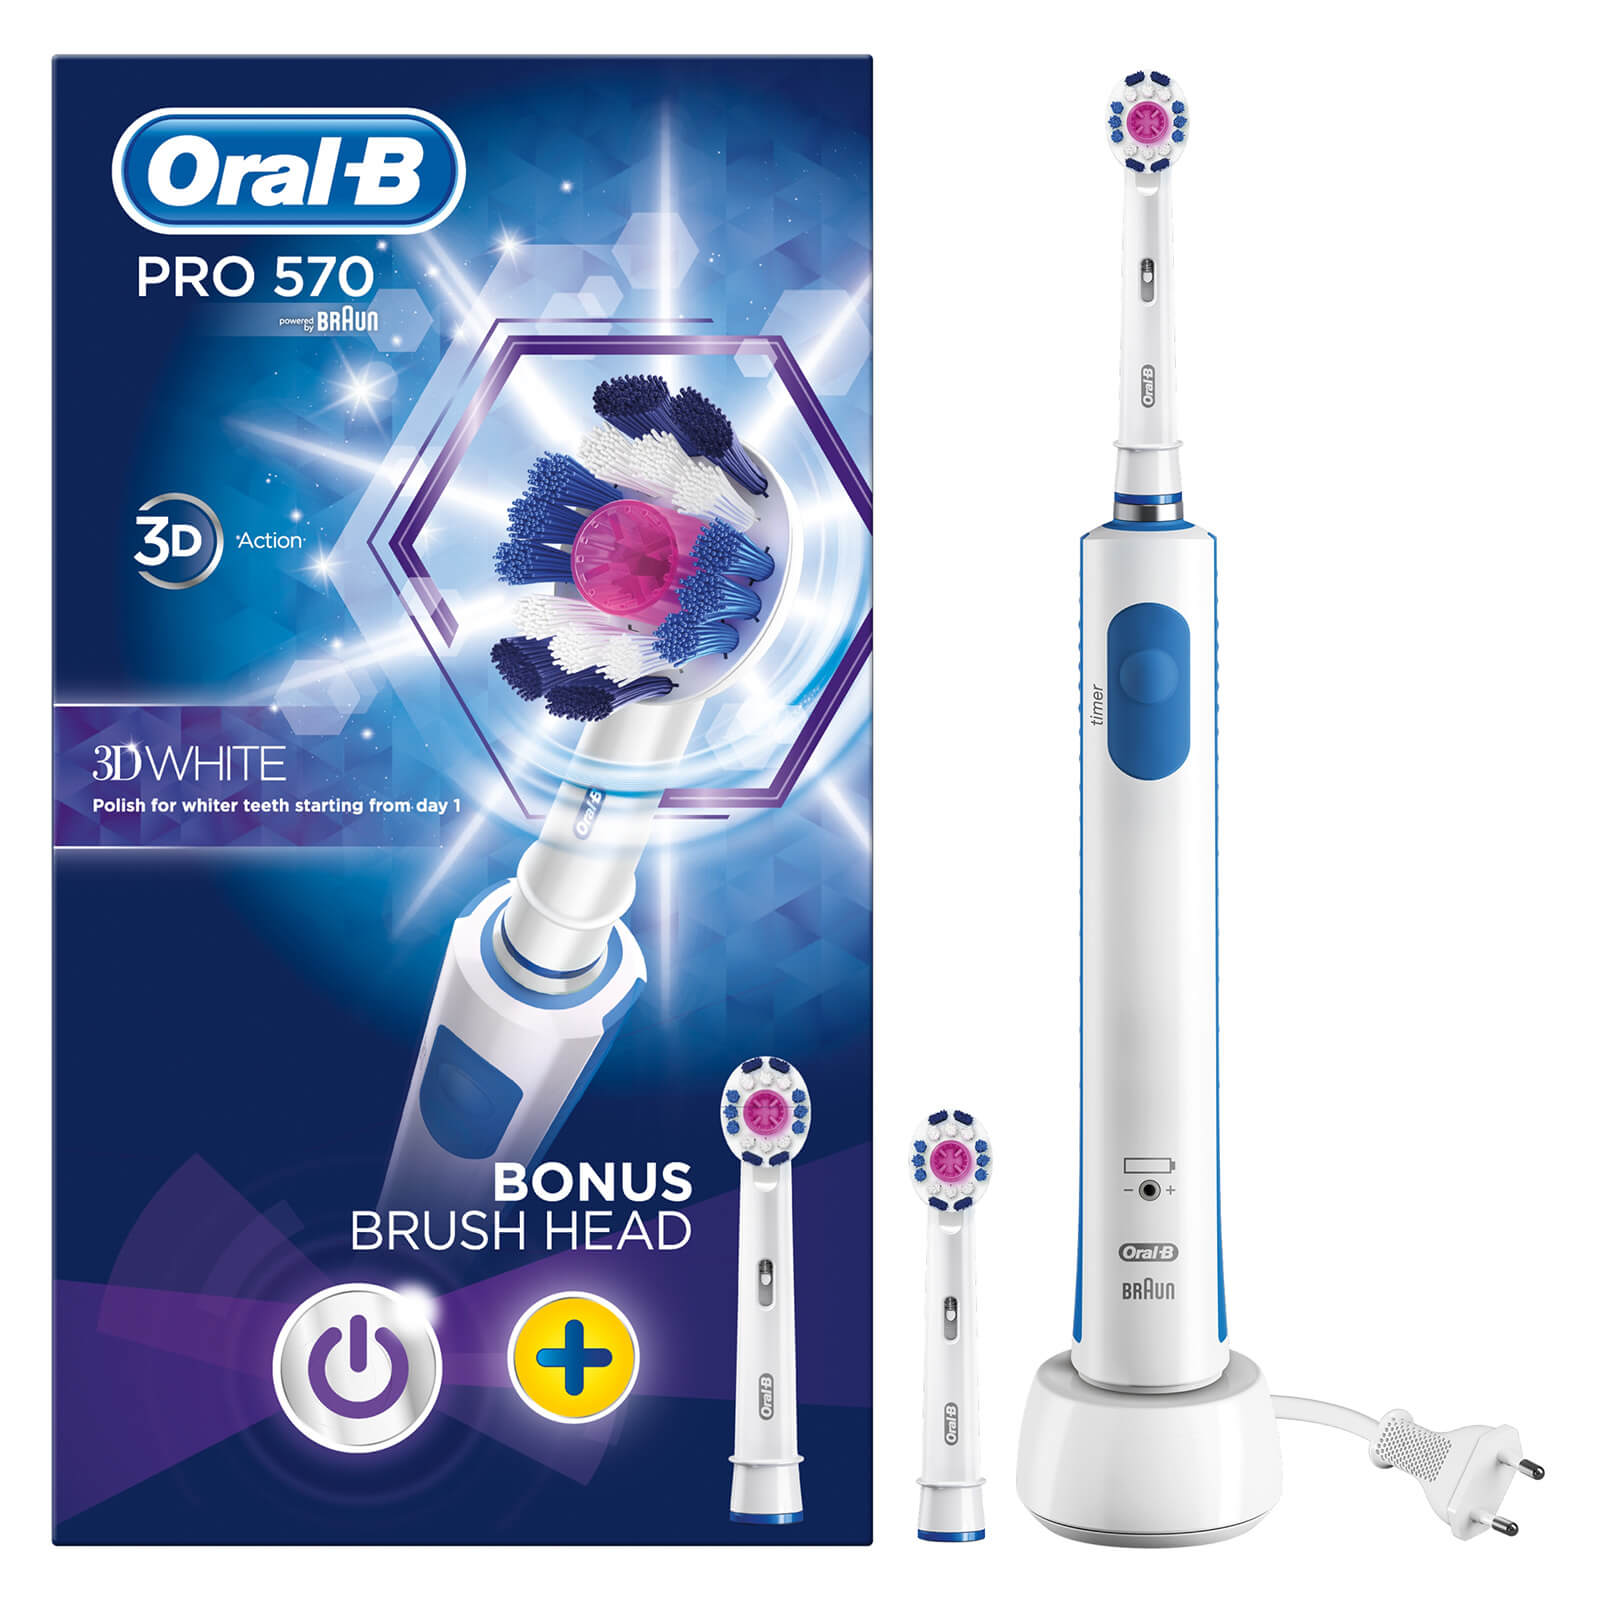 Oral-B Pro 570 3D White Electric Toothbrush lookfantastic.com imagine